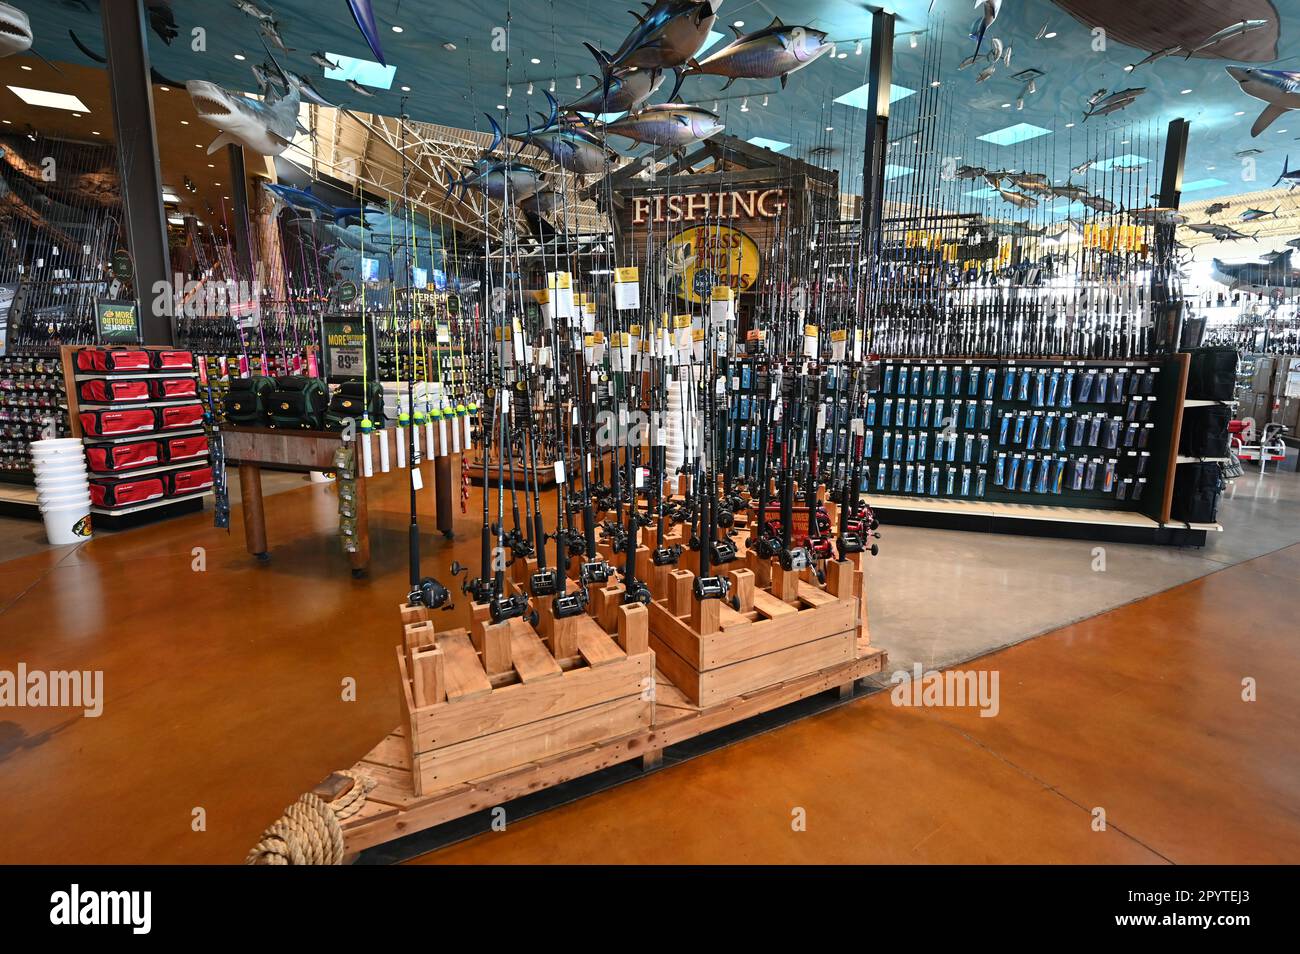 https://c8.alamy.com/comp/2PYTEJ3/fishing-rods-for-sale-at-the-outdoor-world-bass-pro-shop-in-las-vegas-2PYTEJ3.jpg